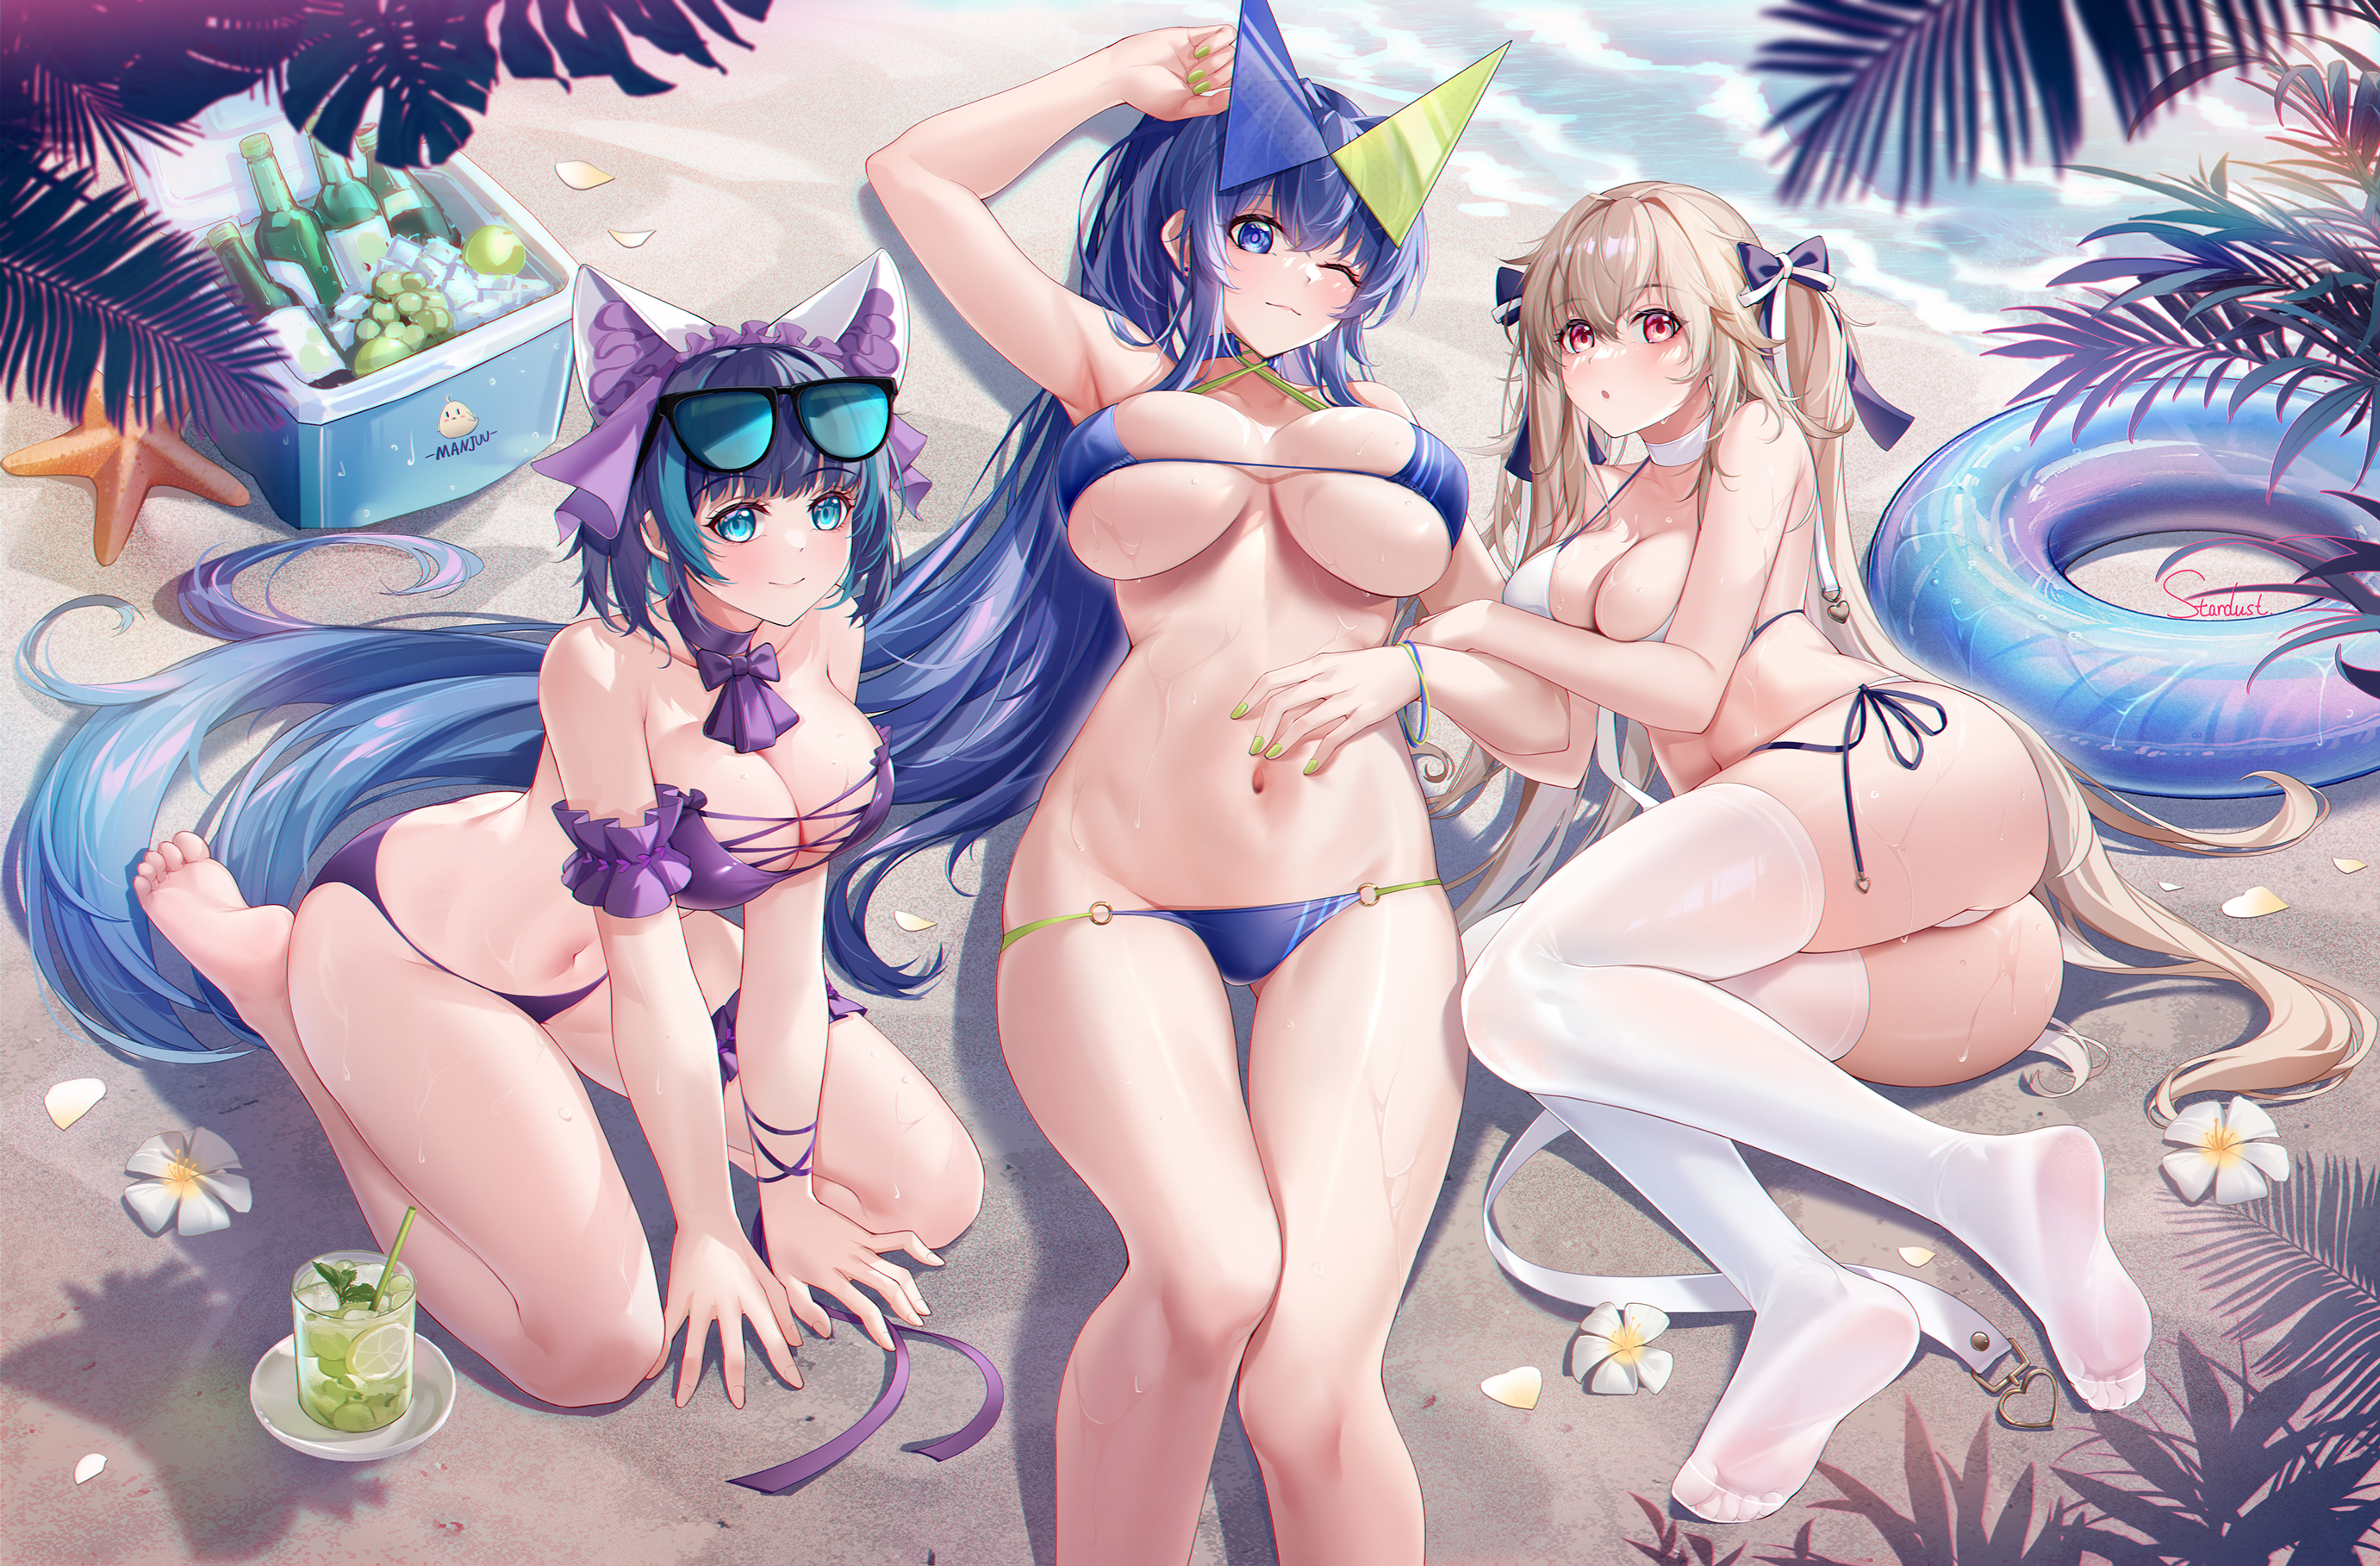 Anime 2762x1817 Azur Lane group of women Anchorage (Azur Lane) ass Cheshire (Azur Lane) legs New Jersey (Azur Lane) women women on beach lying on beach bikini string bikini animal ears cat ears looking at viewer hair ornament beach Stardust (artist) floater women trio high angle purple bikini blue bikini white bikini stockings white stockings petals flowers belly button long hair lying down lying on side kneeling sunglasses leaves water wet body one eye closed wink blushing big boobs cleavage signature starfish cocktails armpits thighs sand swimwear twintails foot sole barefoot toes sea